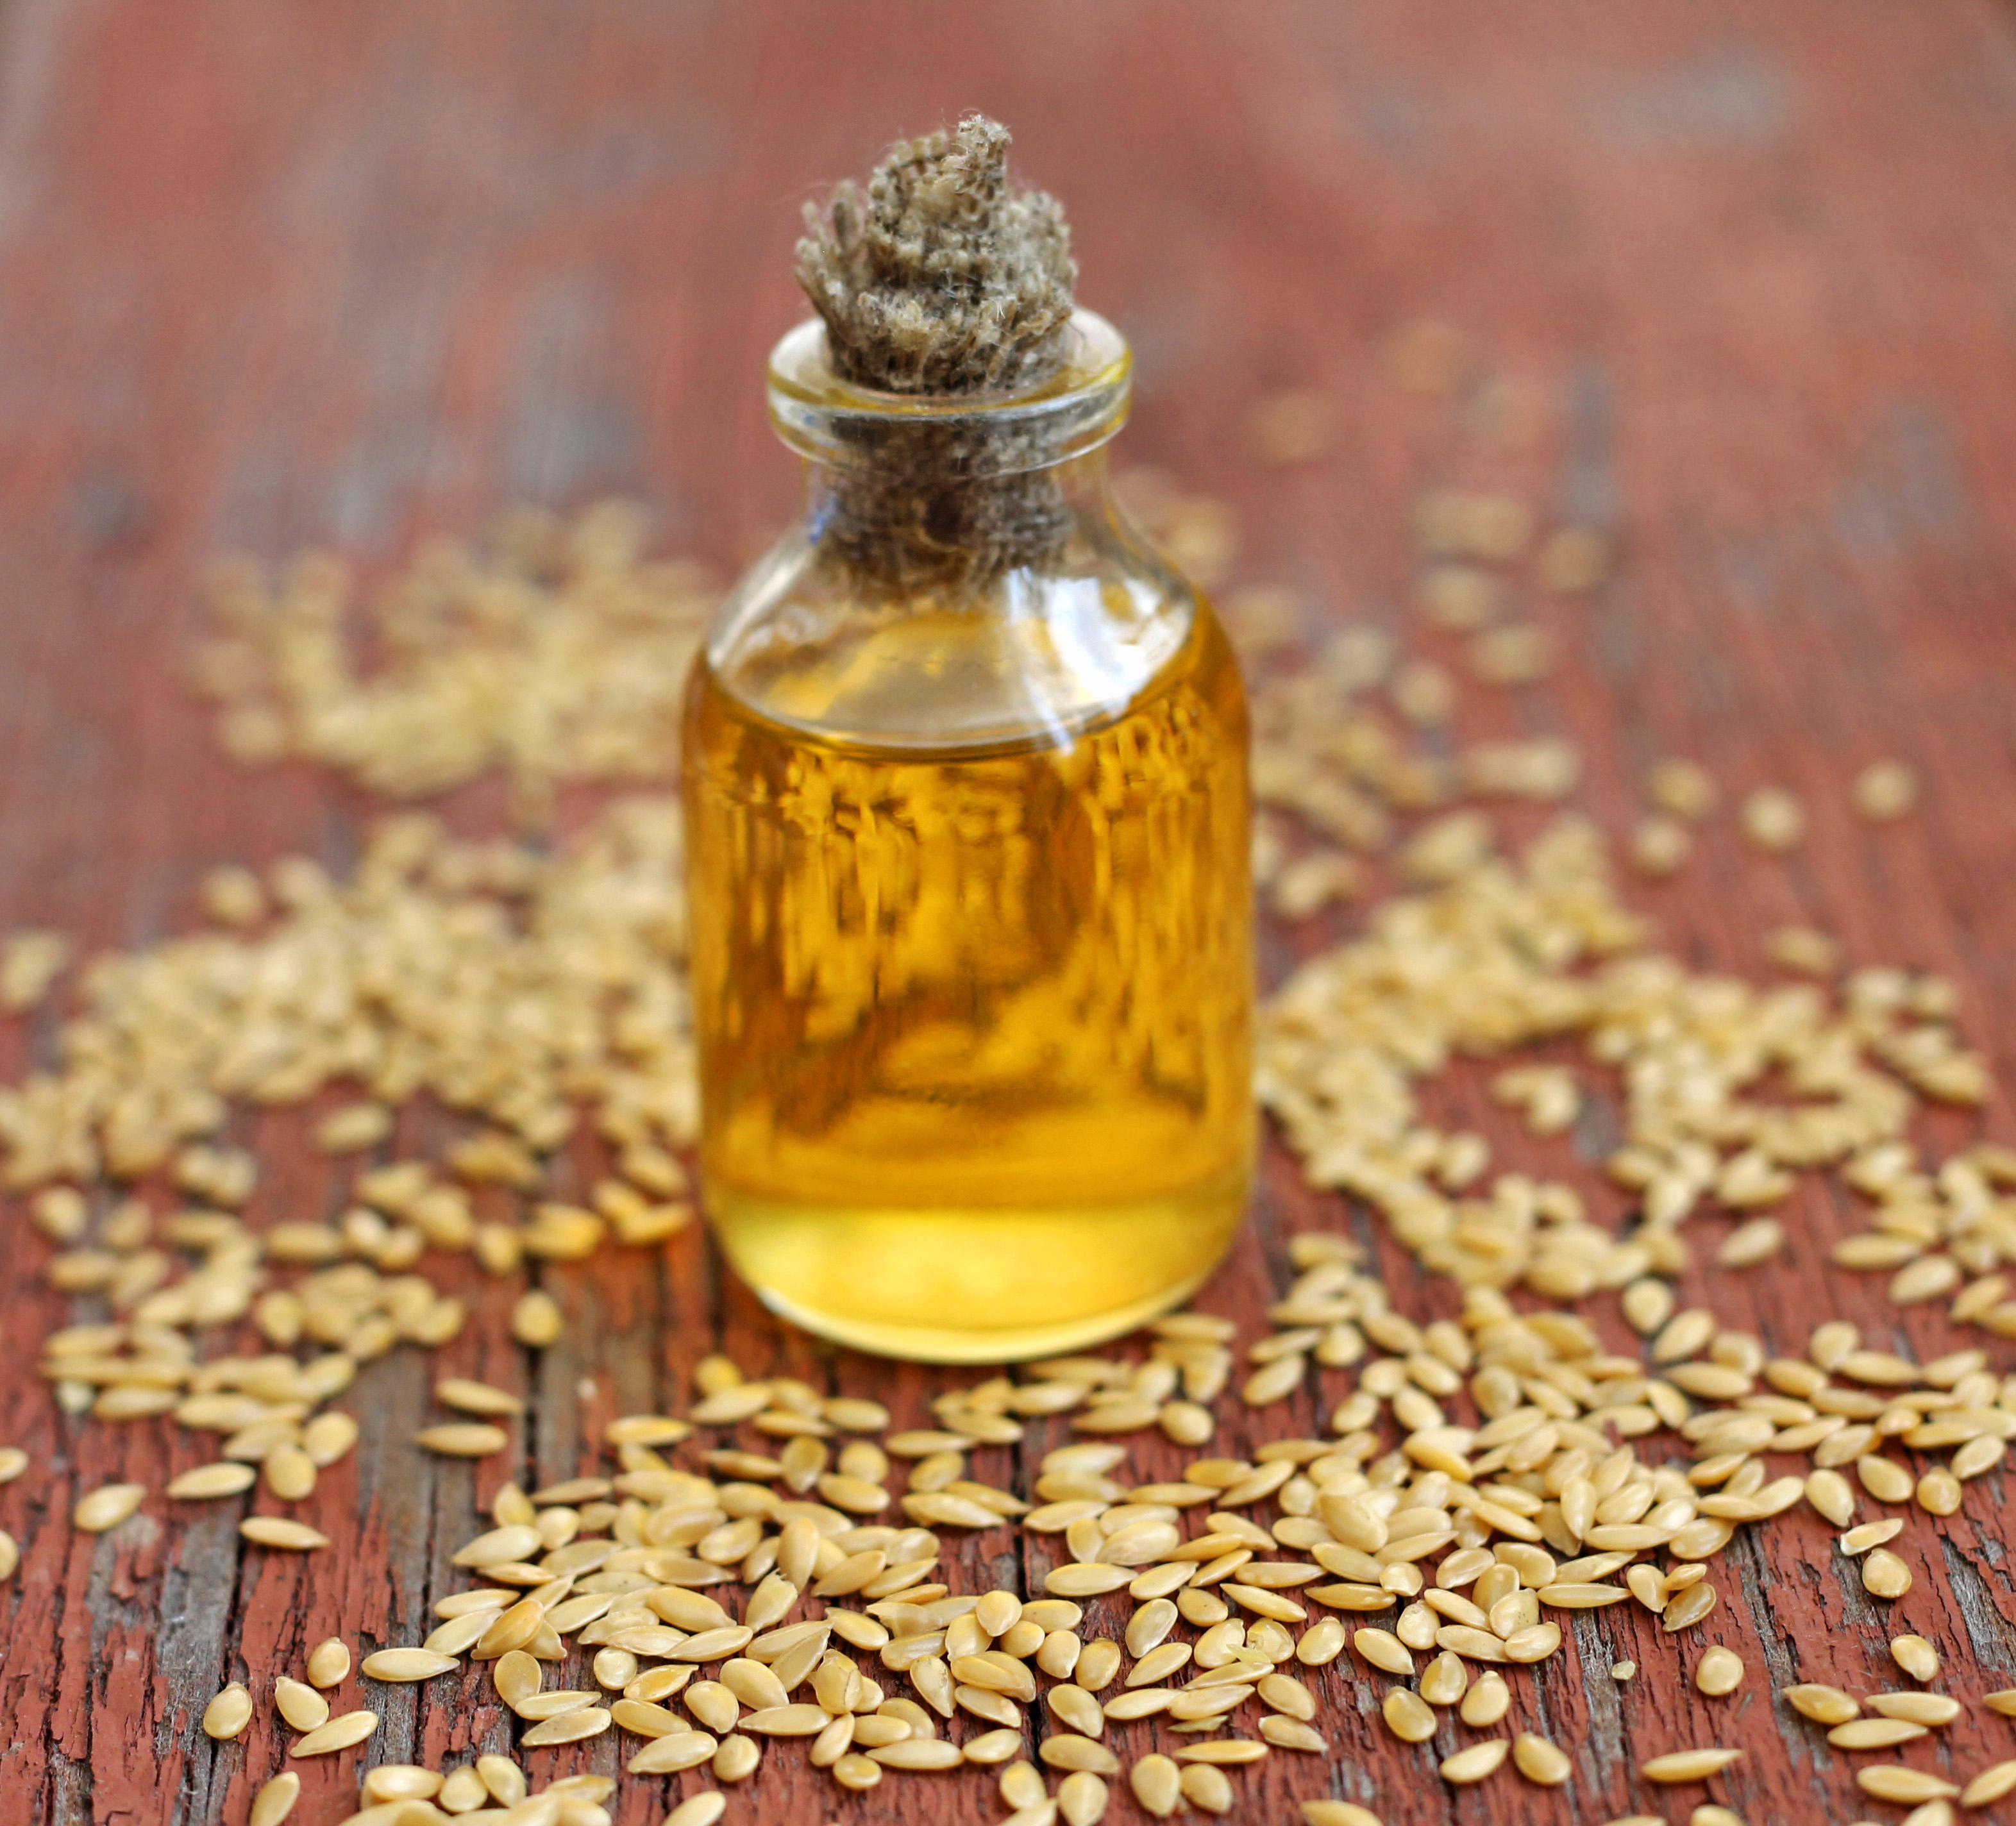 linseed oil in bottle on wooden background, close-up